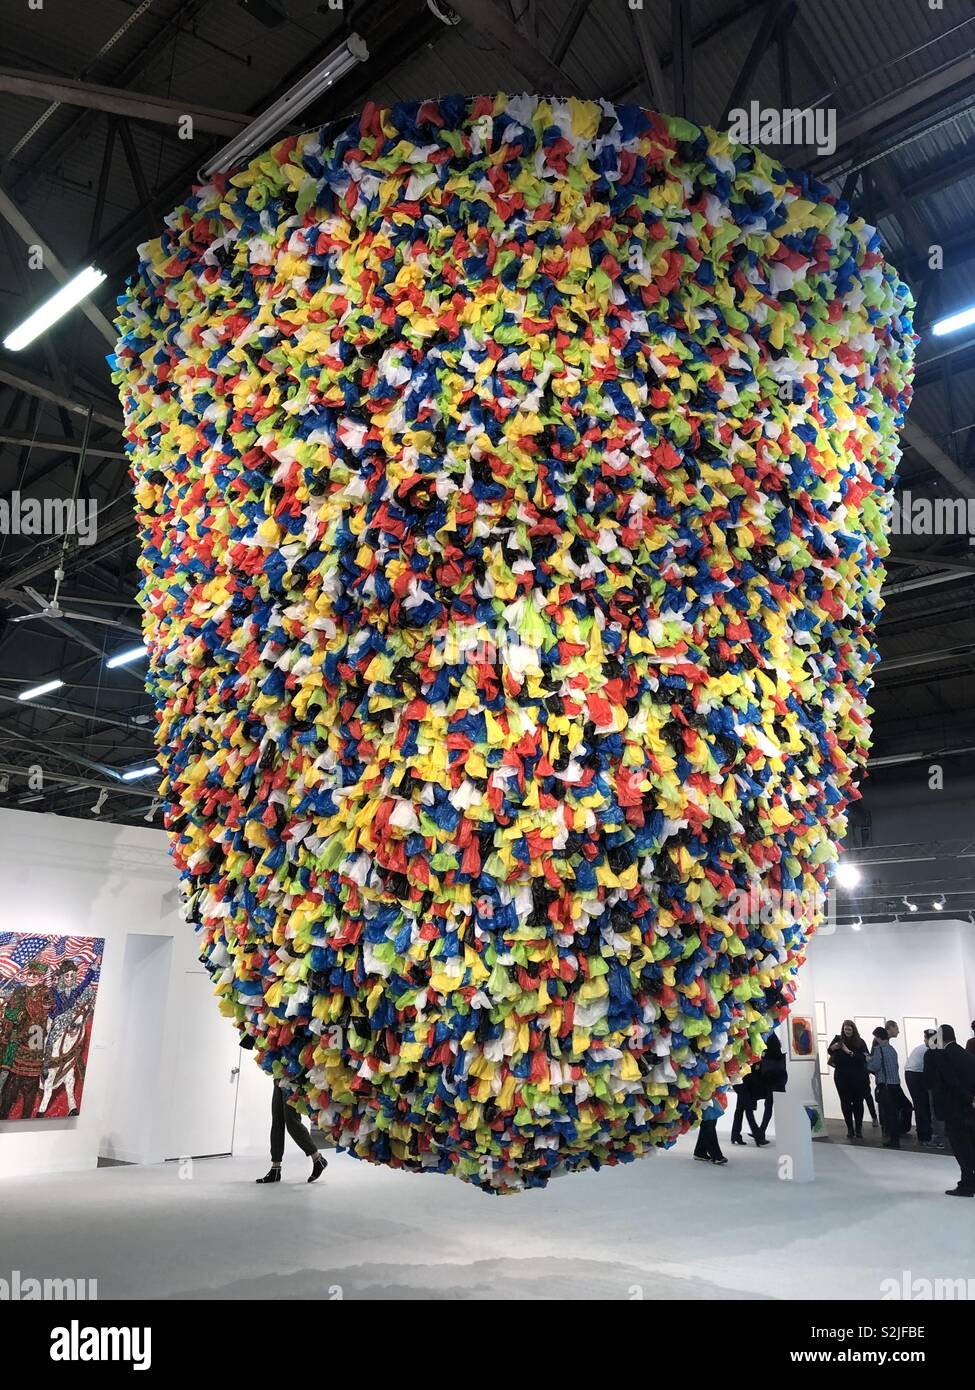 Plastic Bags, 2019. Installation art by Pascale Marthine Tayou at The Armory Show, Pier 94, New York Stock Photo